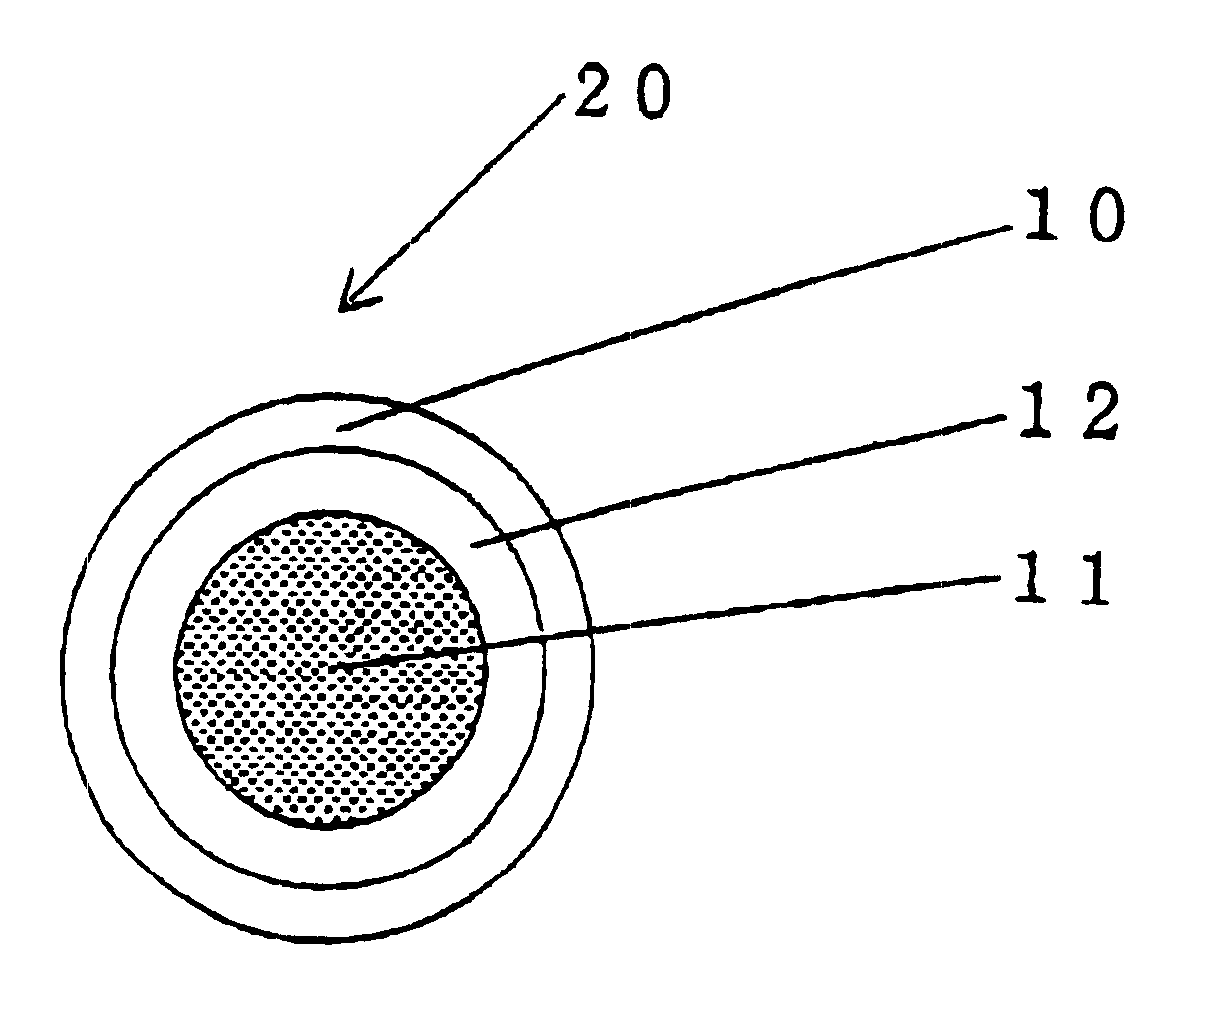 Encapsulated unsaturated fatty acid substance and method for producing the same